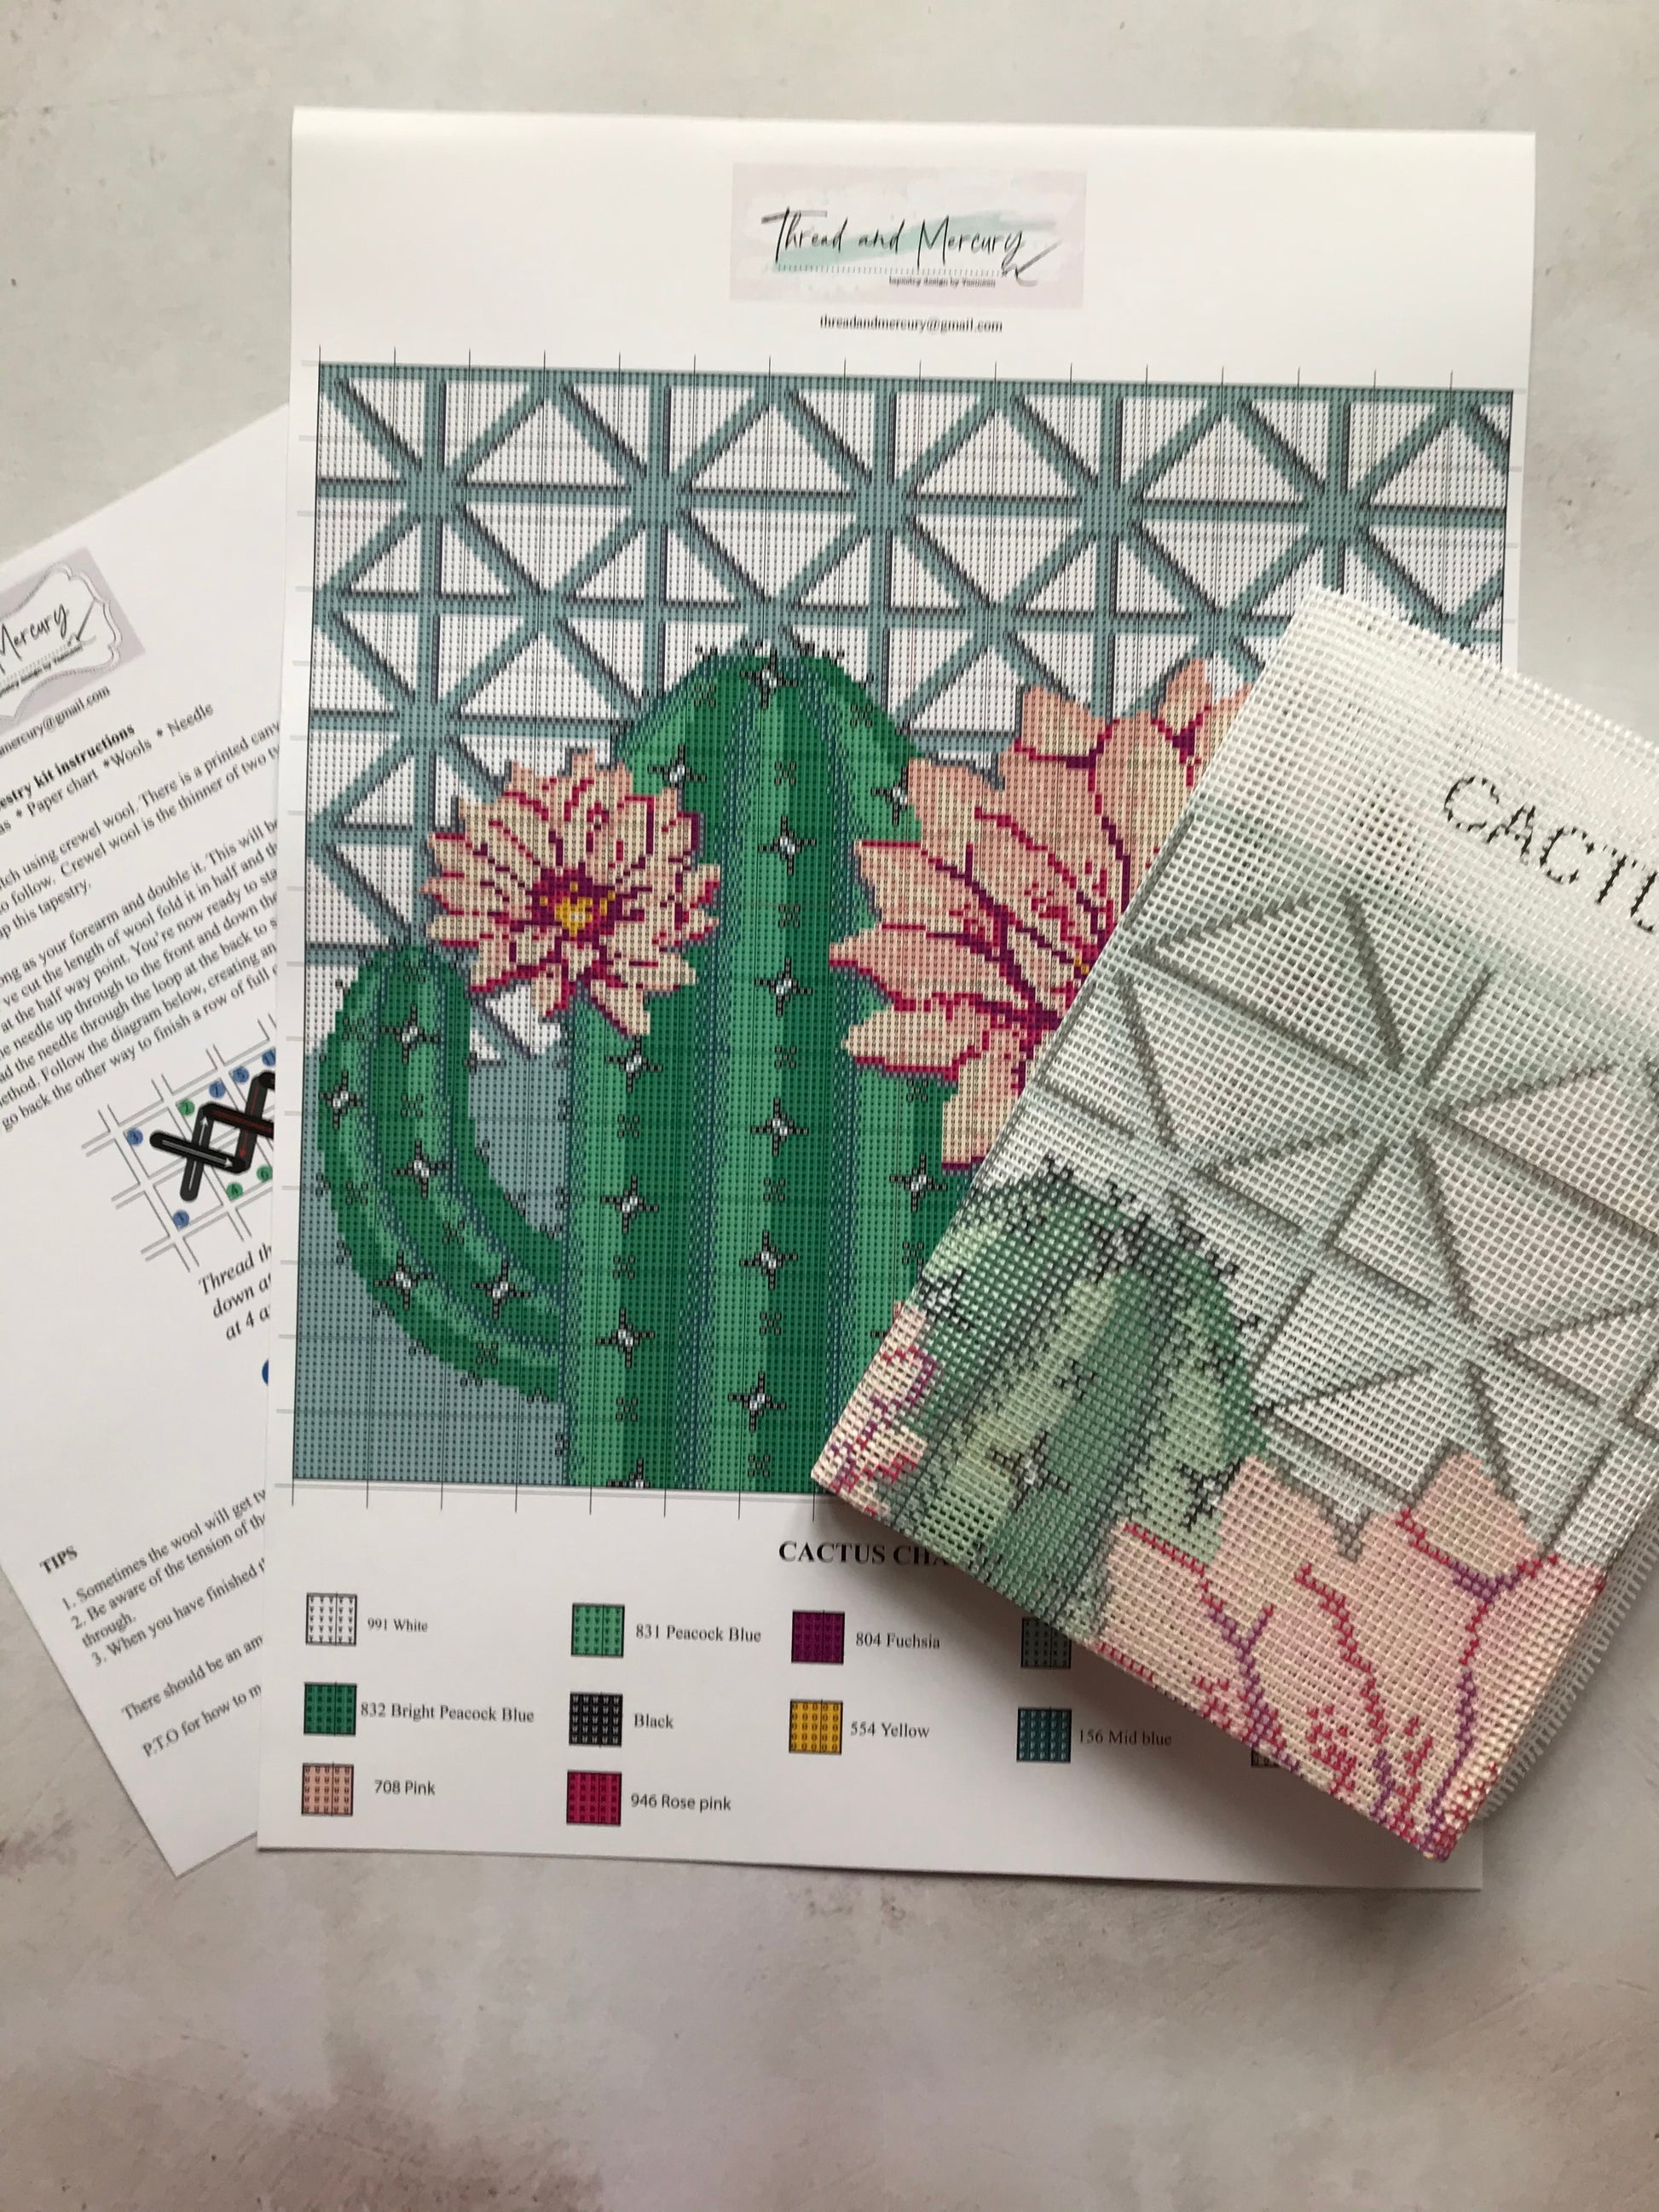 printed paper chart of the cactus design, instructions and printed interlock canvas